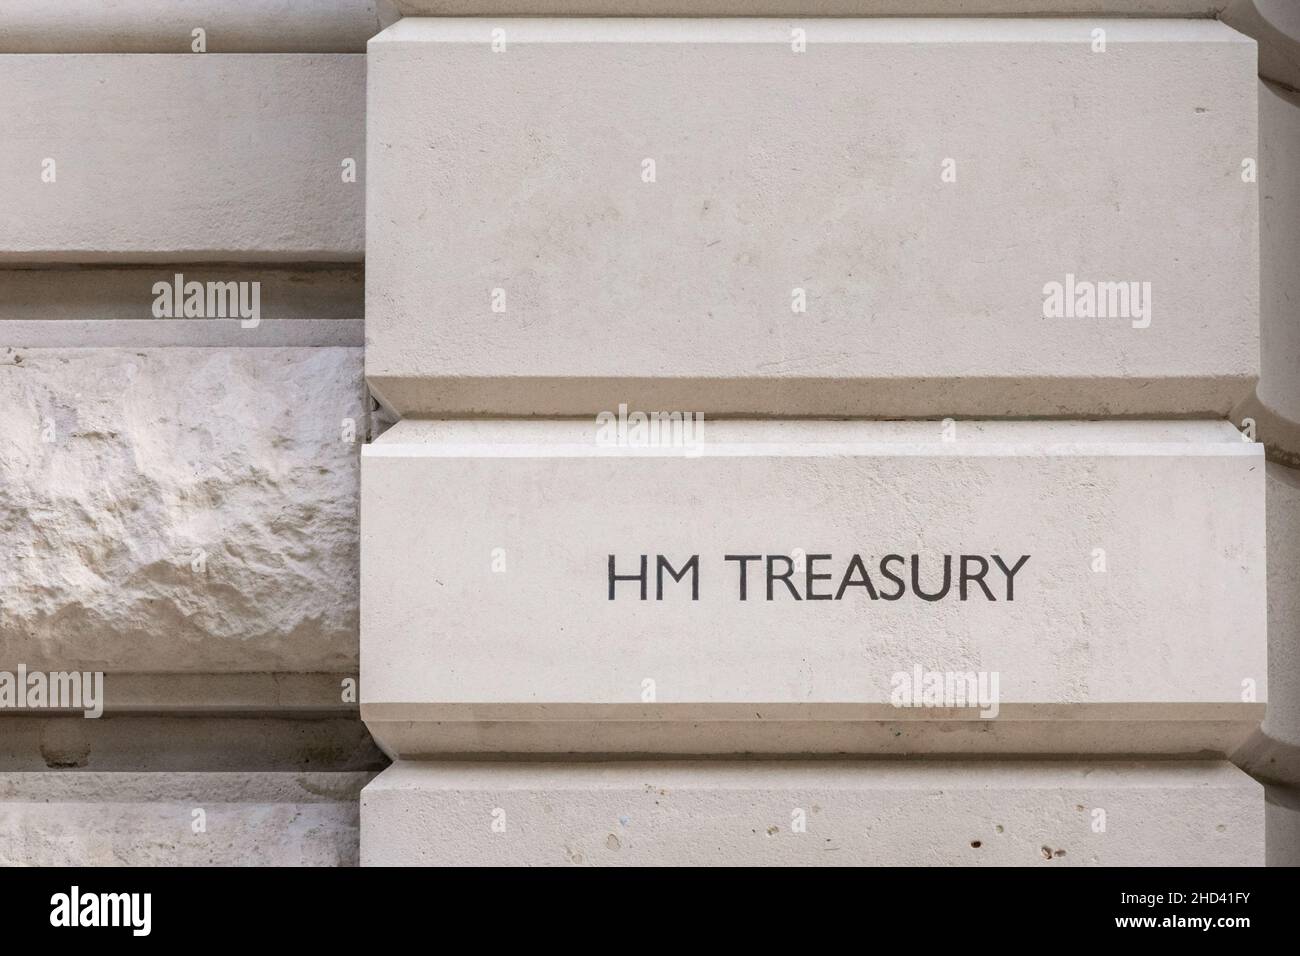 Her Majesty's HM Treasury, signage at main door, building exterior, Horse Guards Road, London, England Stock Photo